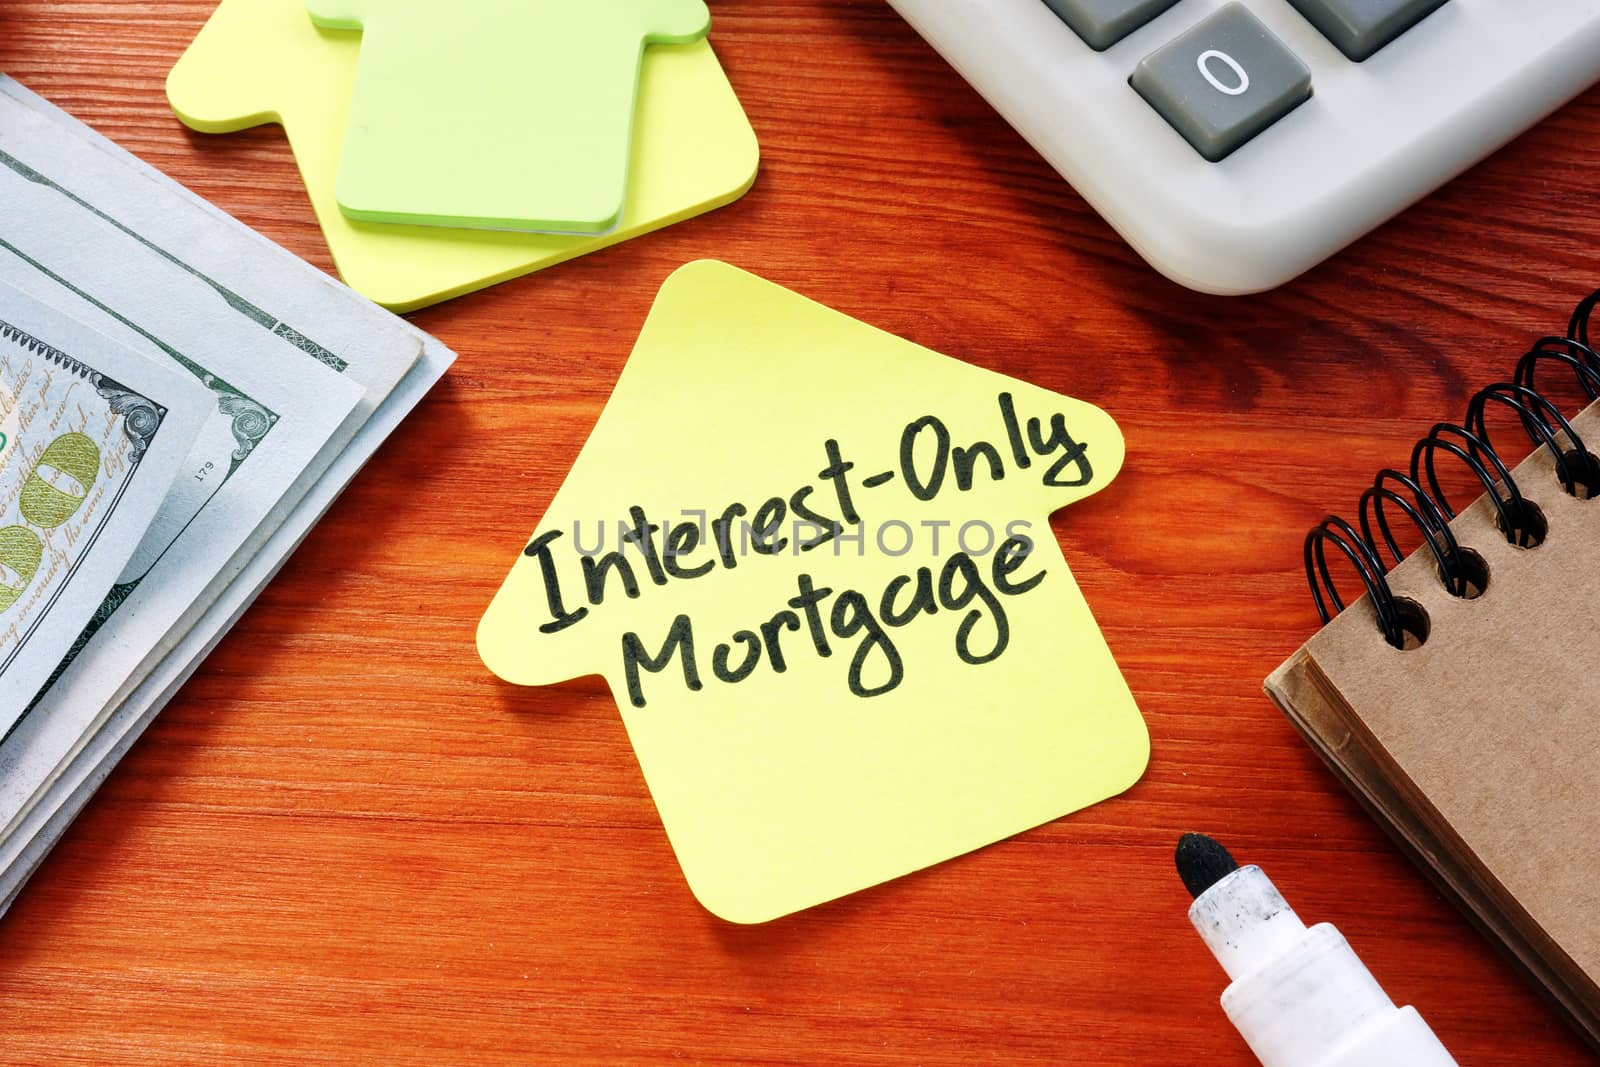 Interest Only Mortgage phrase on the paper home.